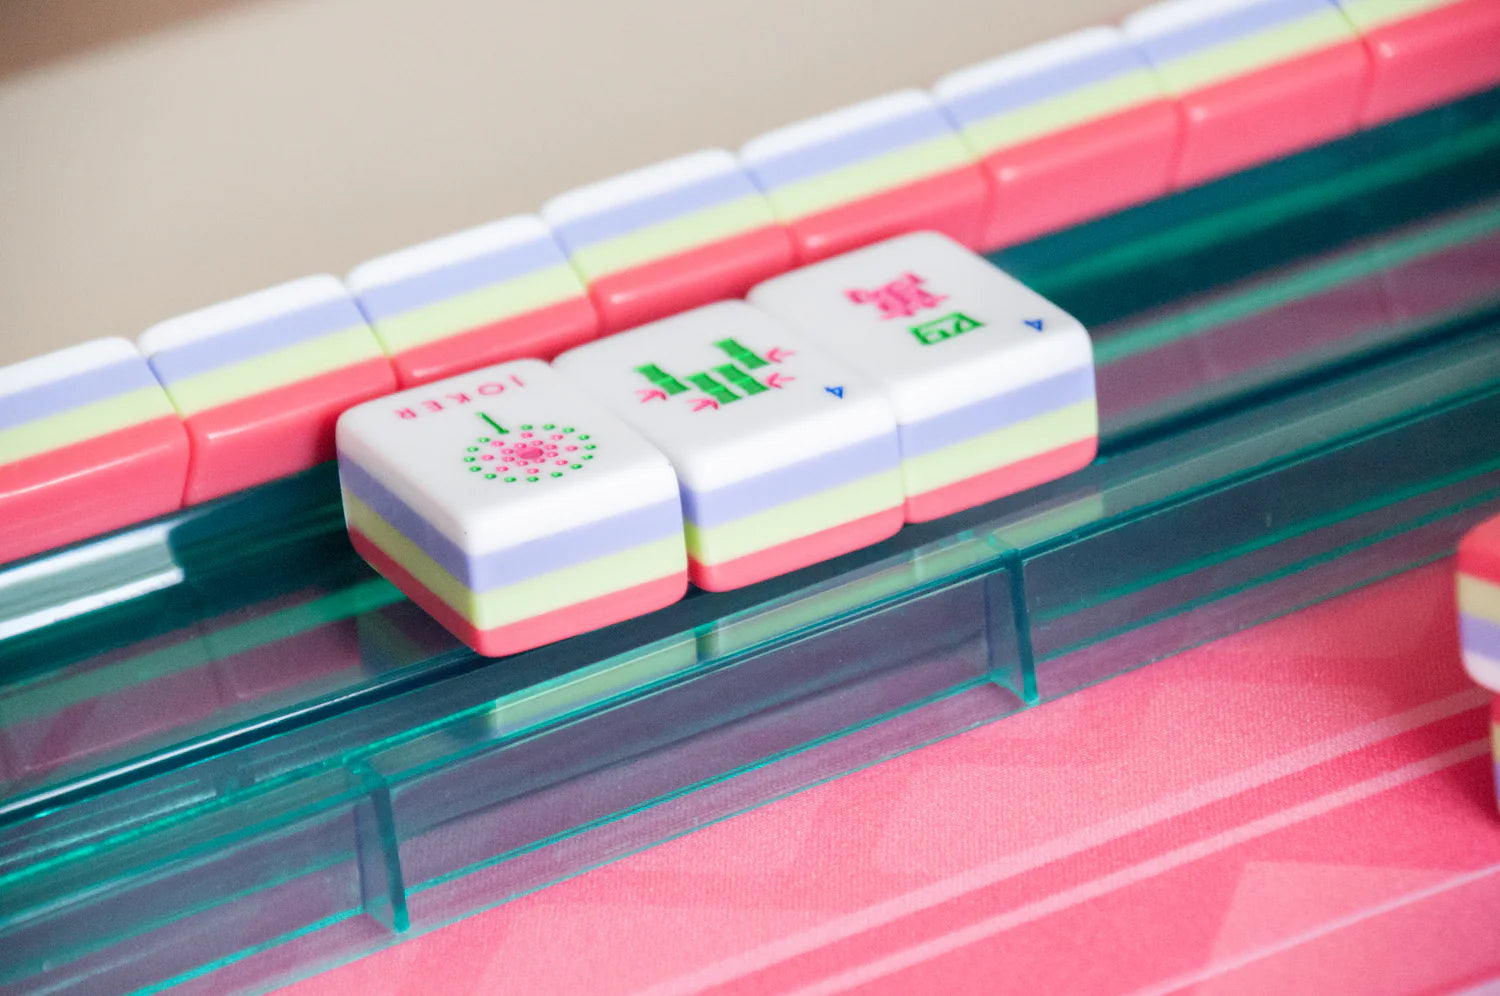 Three pink and green mahjong tiles sitting on a green platform on the side of a hot pink Mahjong game mat.